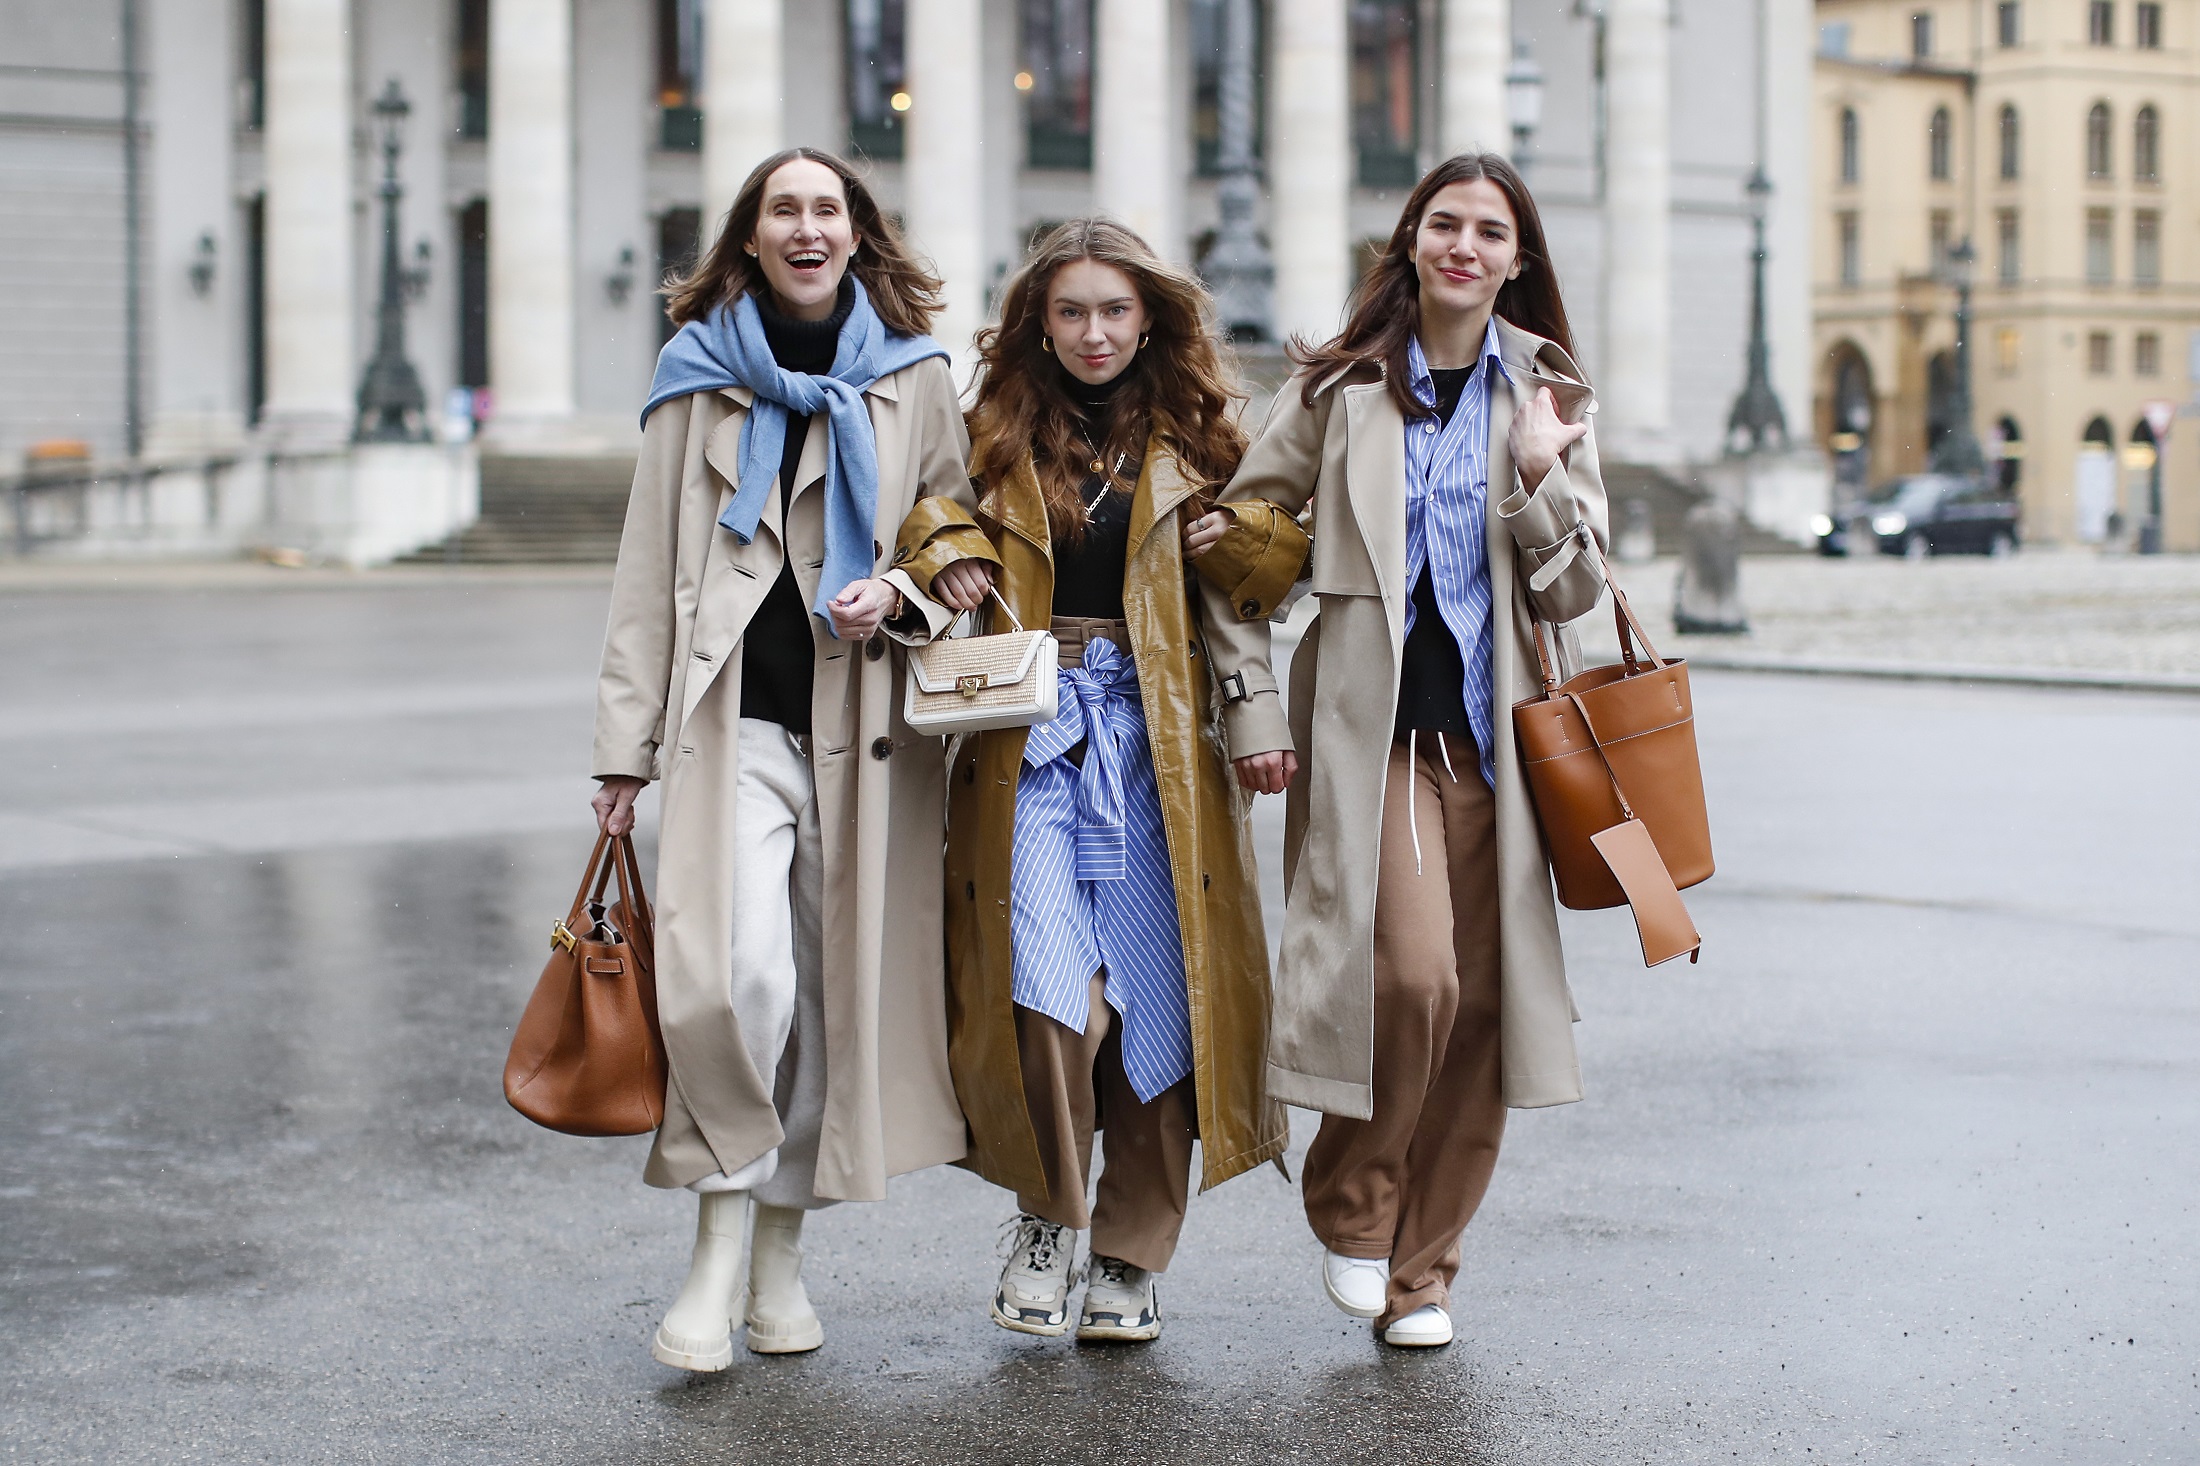 We take a closer look at the trench and see how celebrities style it